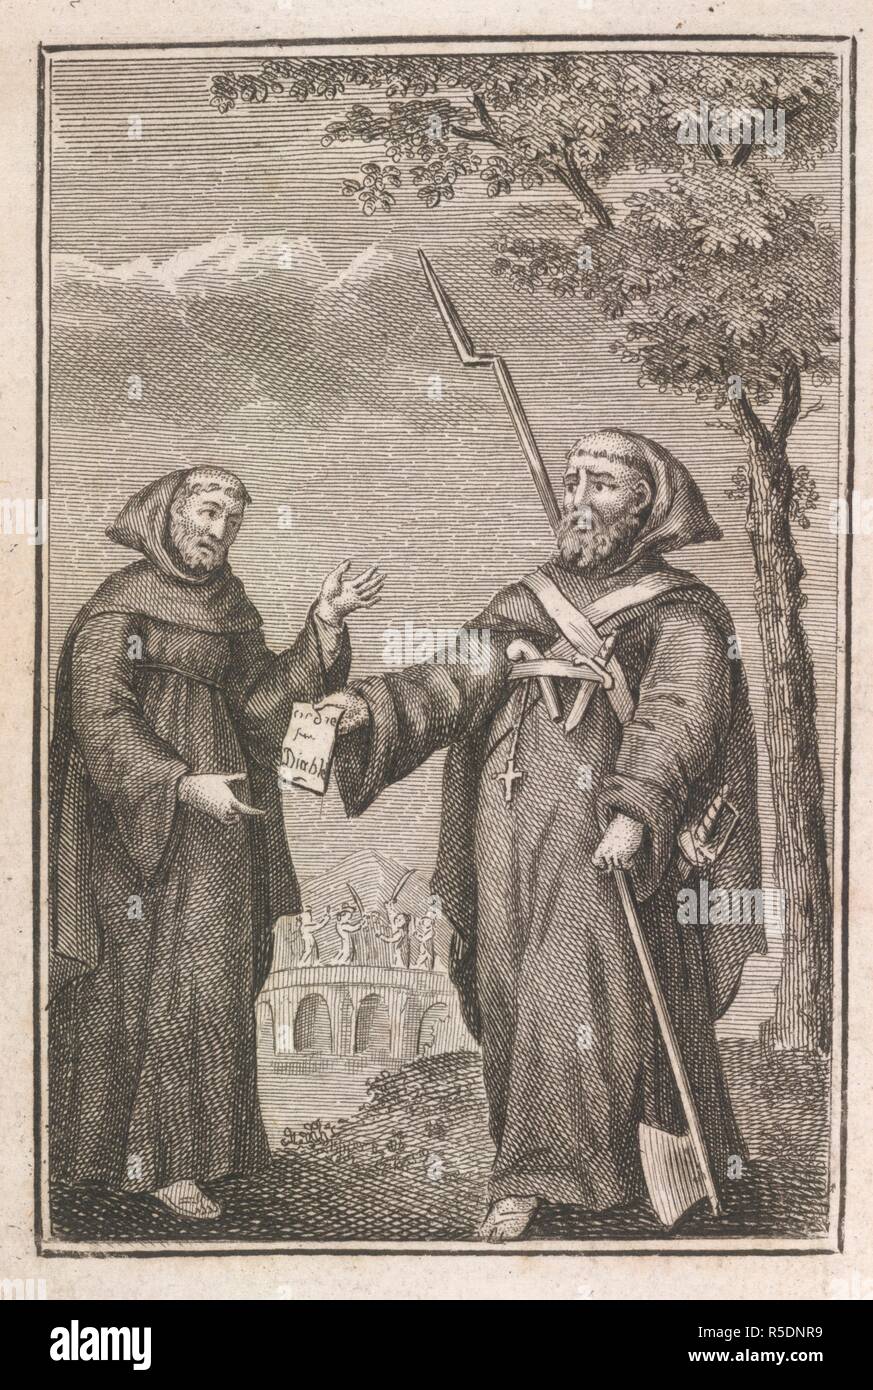 Michele Pezza, known as Fra Diavolo (1771â€“1806). A famous Neapolitan guerrilla leader who resisted the French occupation of Naples. Pezza figures prominently in folk lore and fiction. The picture shows him disguised as a priest about to cut down the â€œLiberty Treeâ€ which the French had planted, replacing it with a cross that still stands. Pezza was betrayed to the French, and hanged. . Les Exploits et les Amours de FrÃ¨re Diable. Paris, 1801. Source: 12315.aaa.45, frontispiece. Language: French. Stock Photo